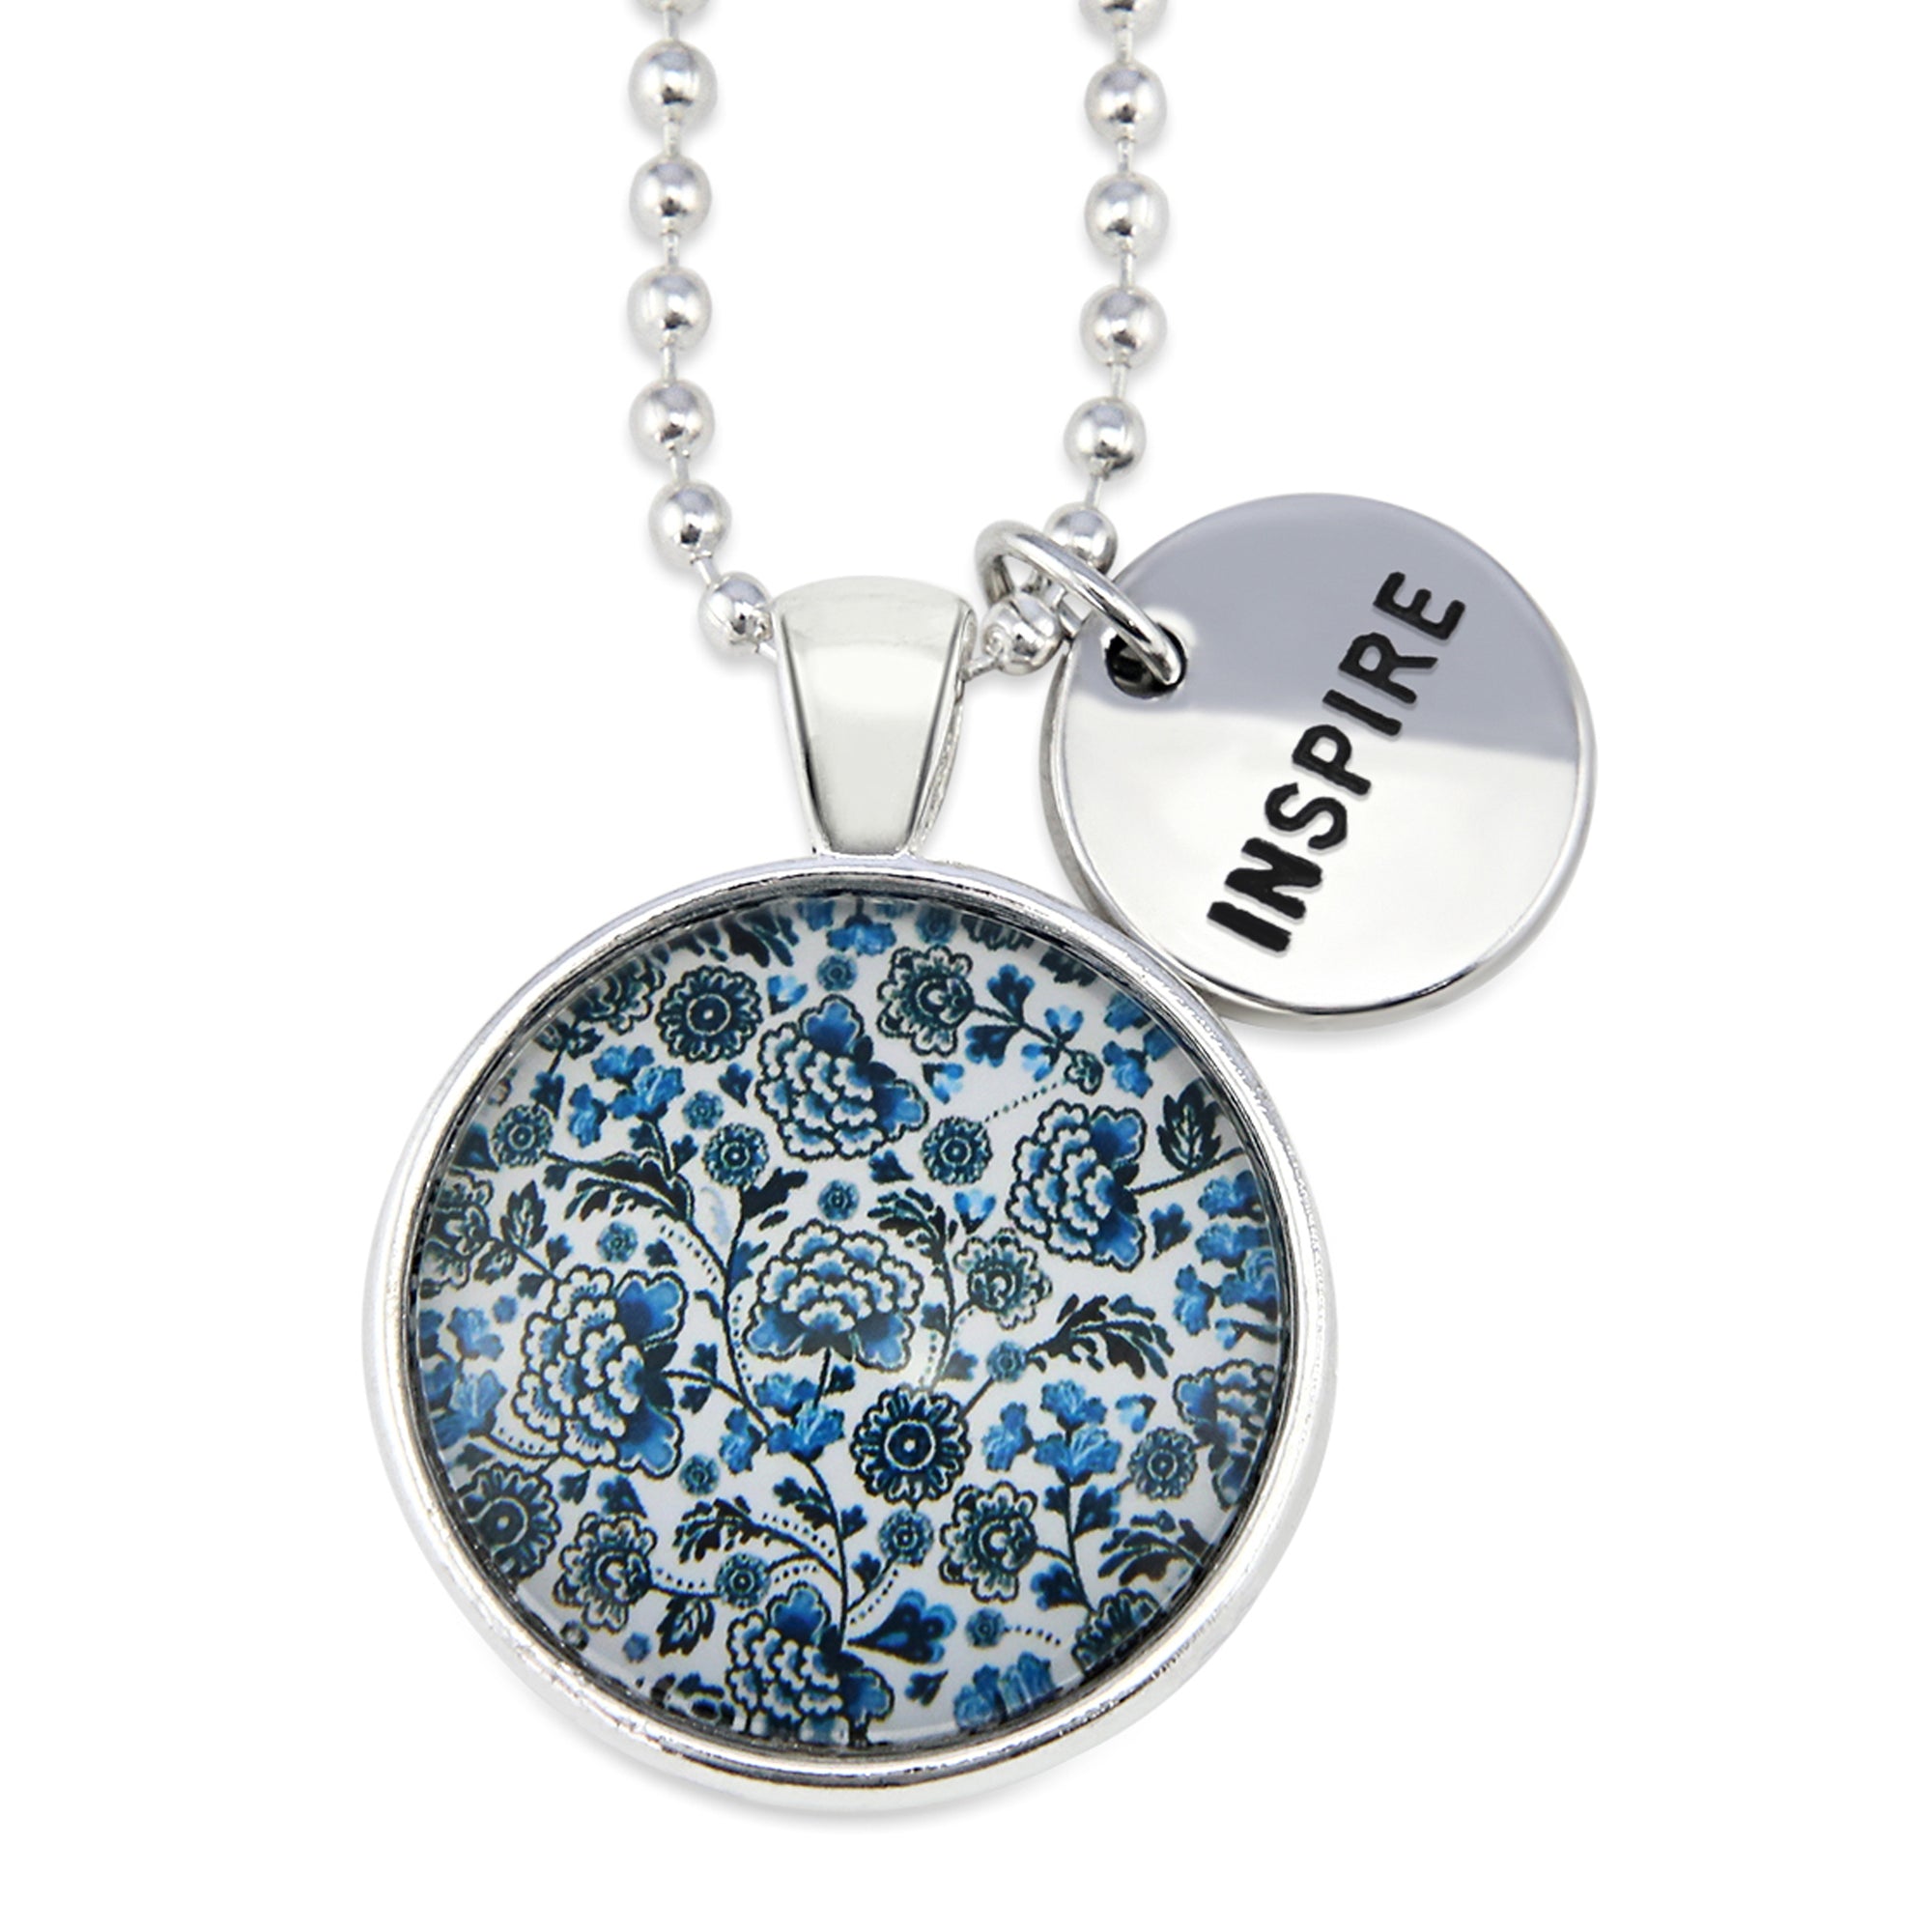 Blue Collection - Bright Silver 'INSPIRE' Necklace - Blue Danube (10613)